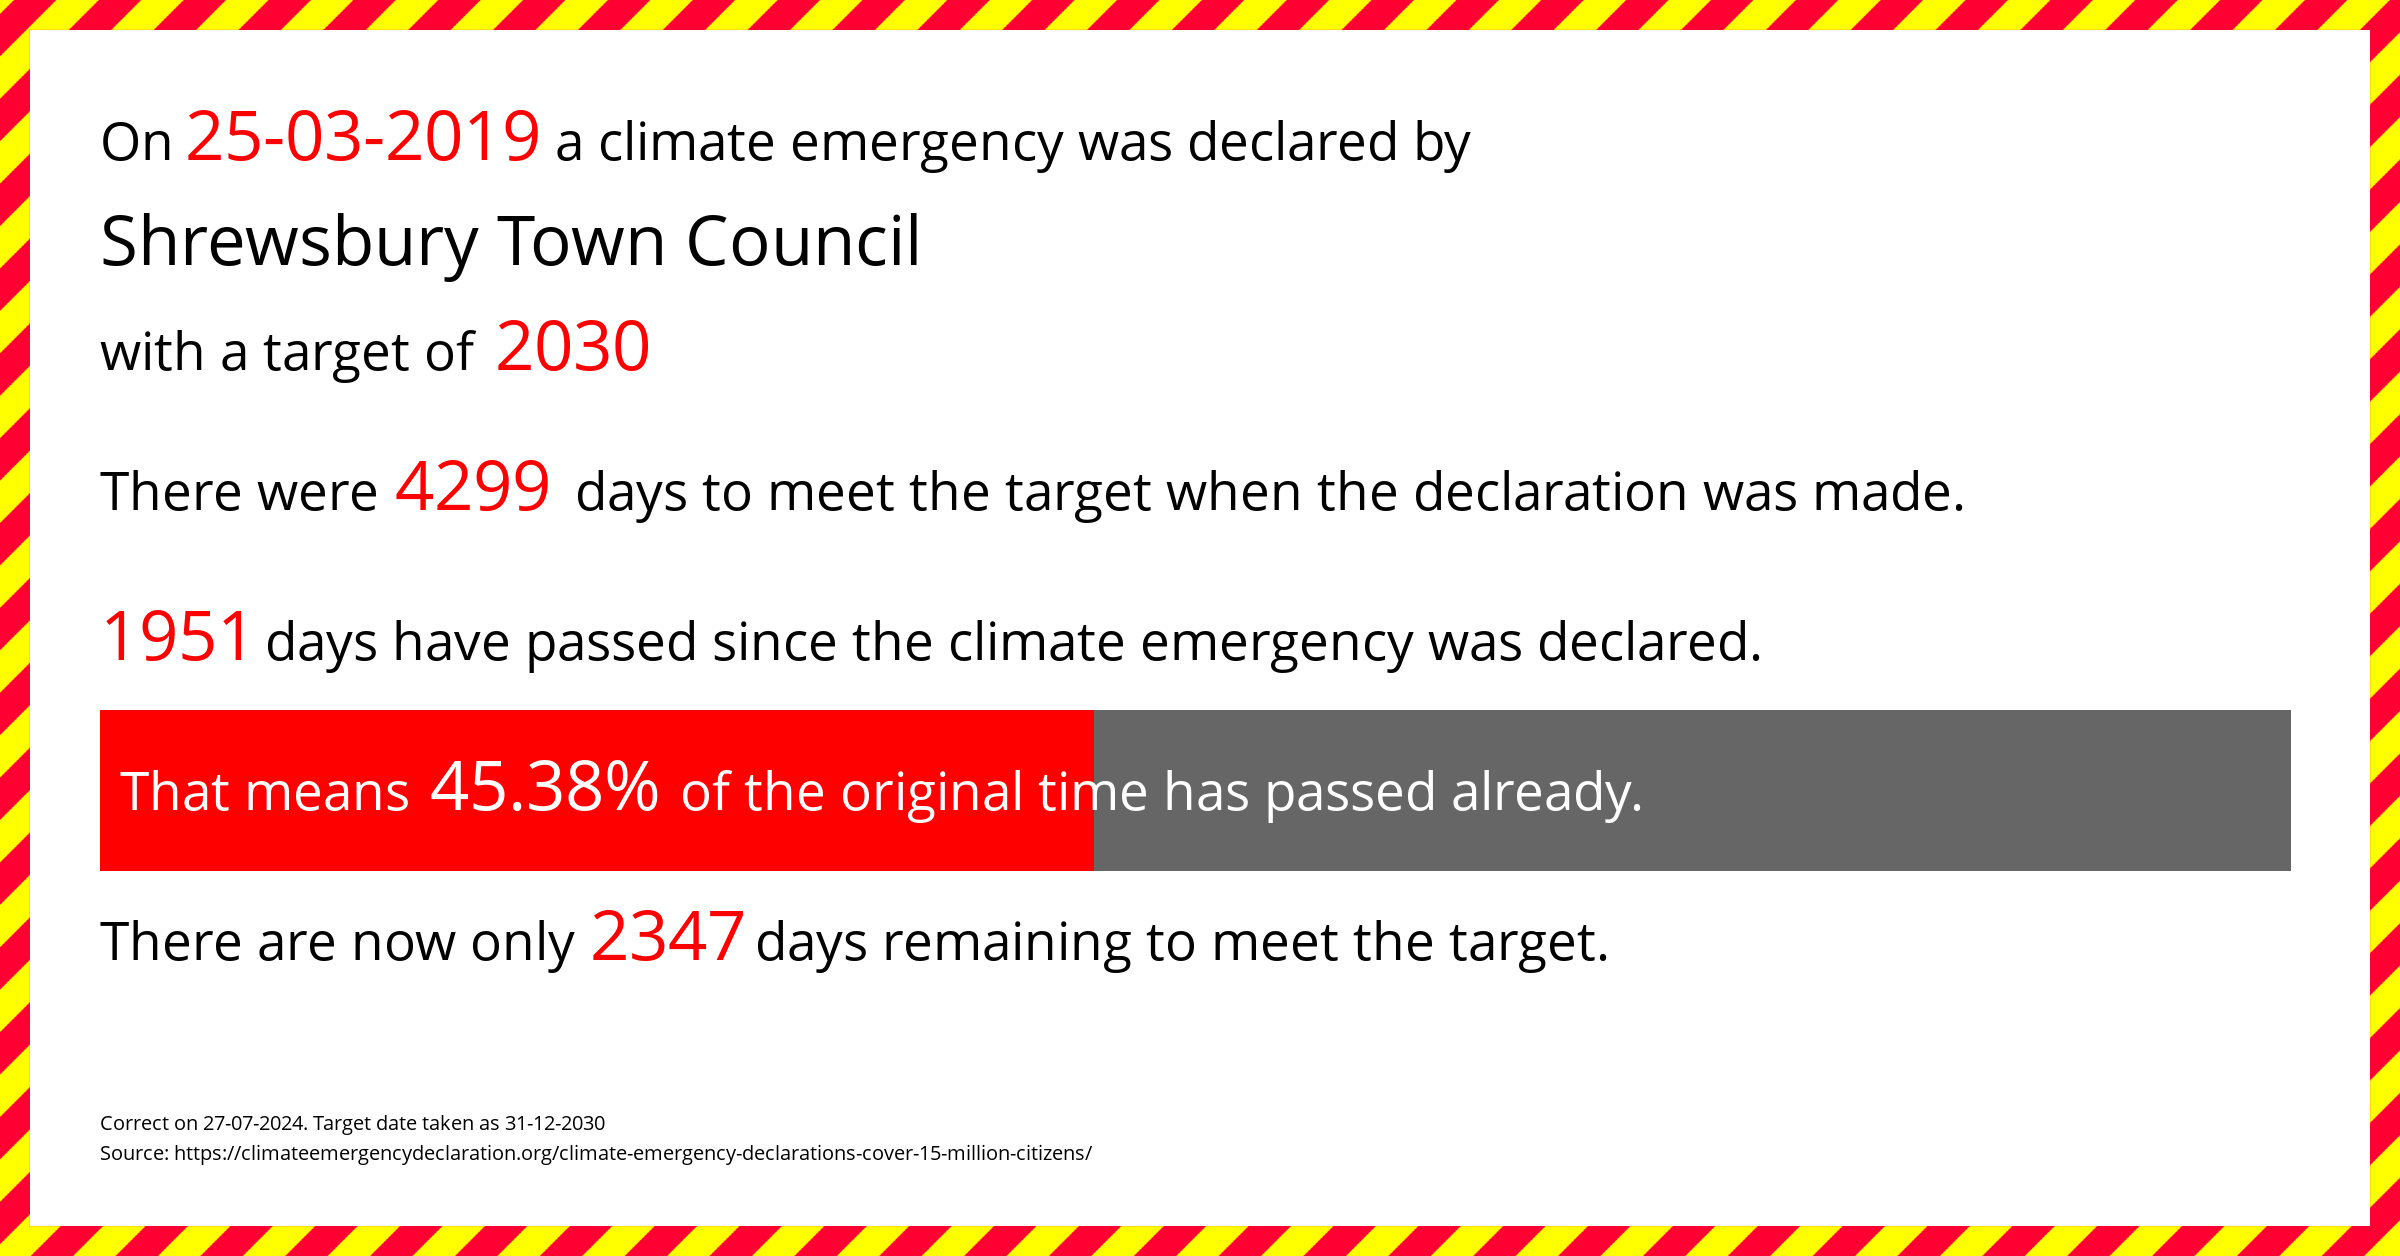 Shrewsbury Town Council declared a Climate emergency on Monday 25th March 2019, with a target of 2030.